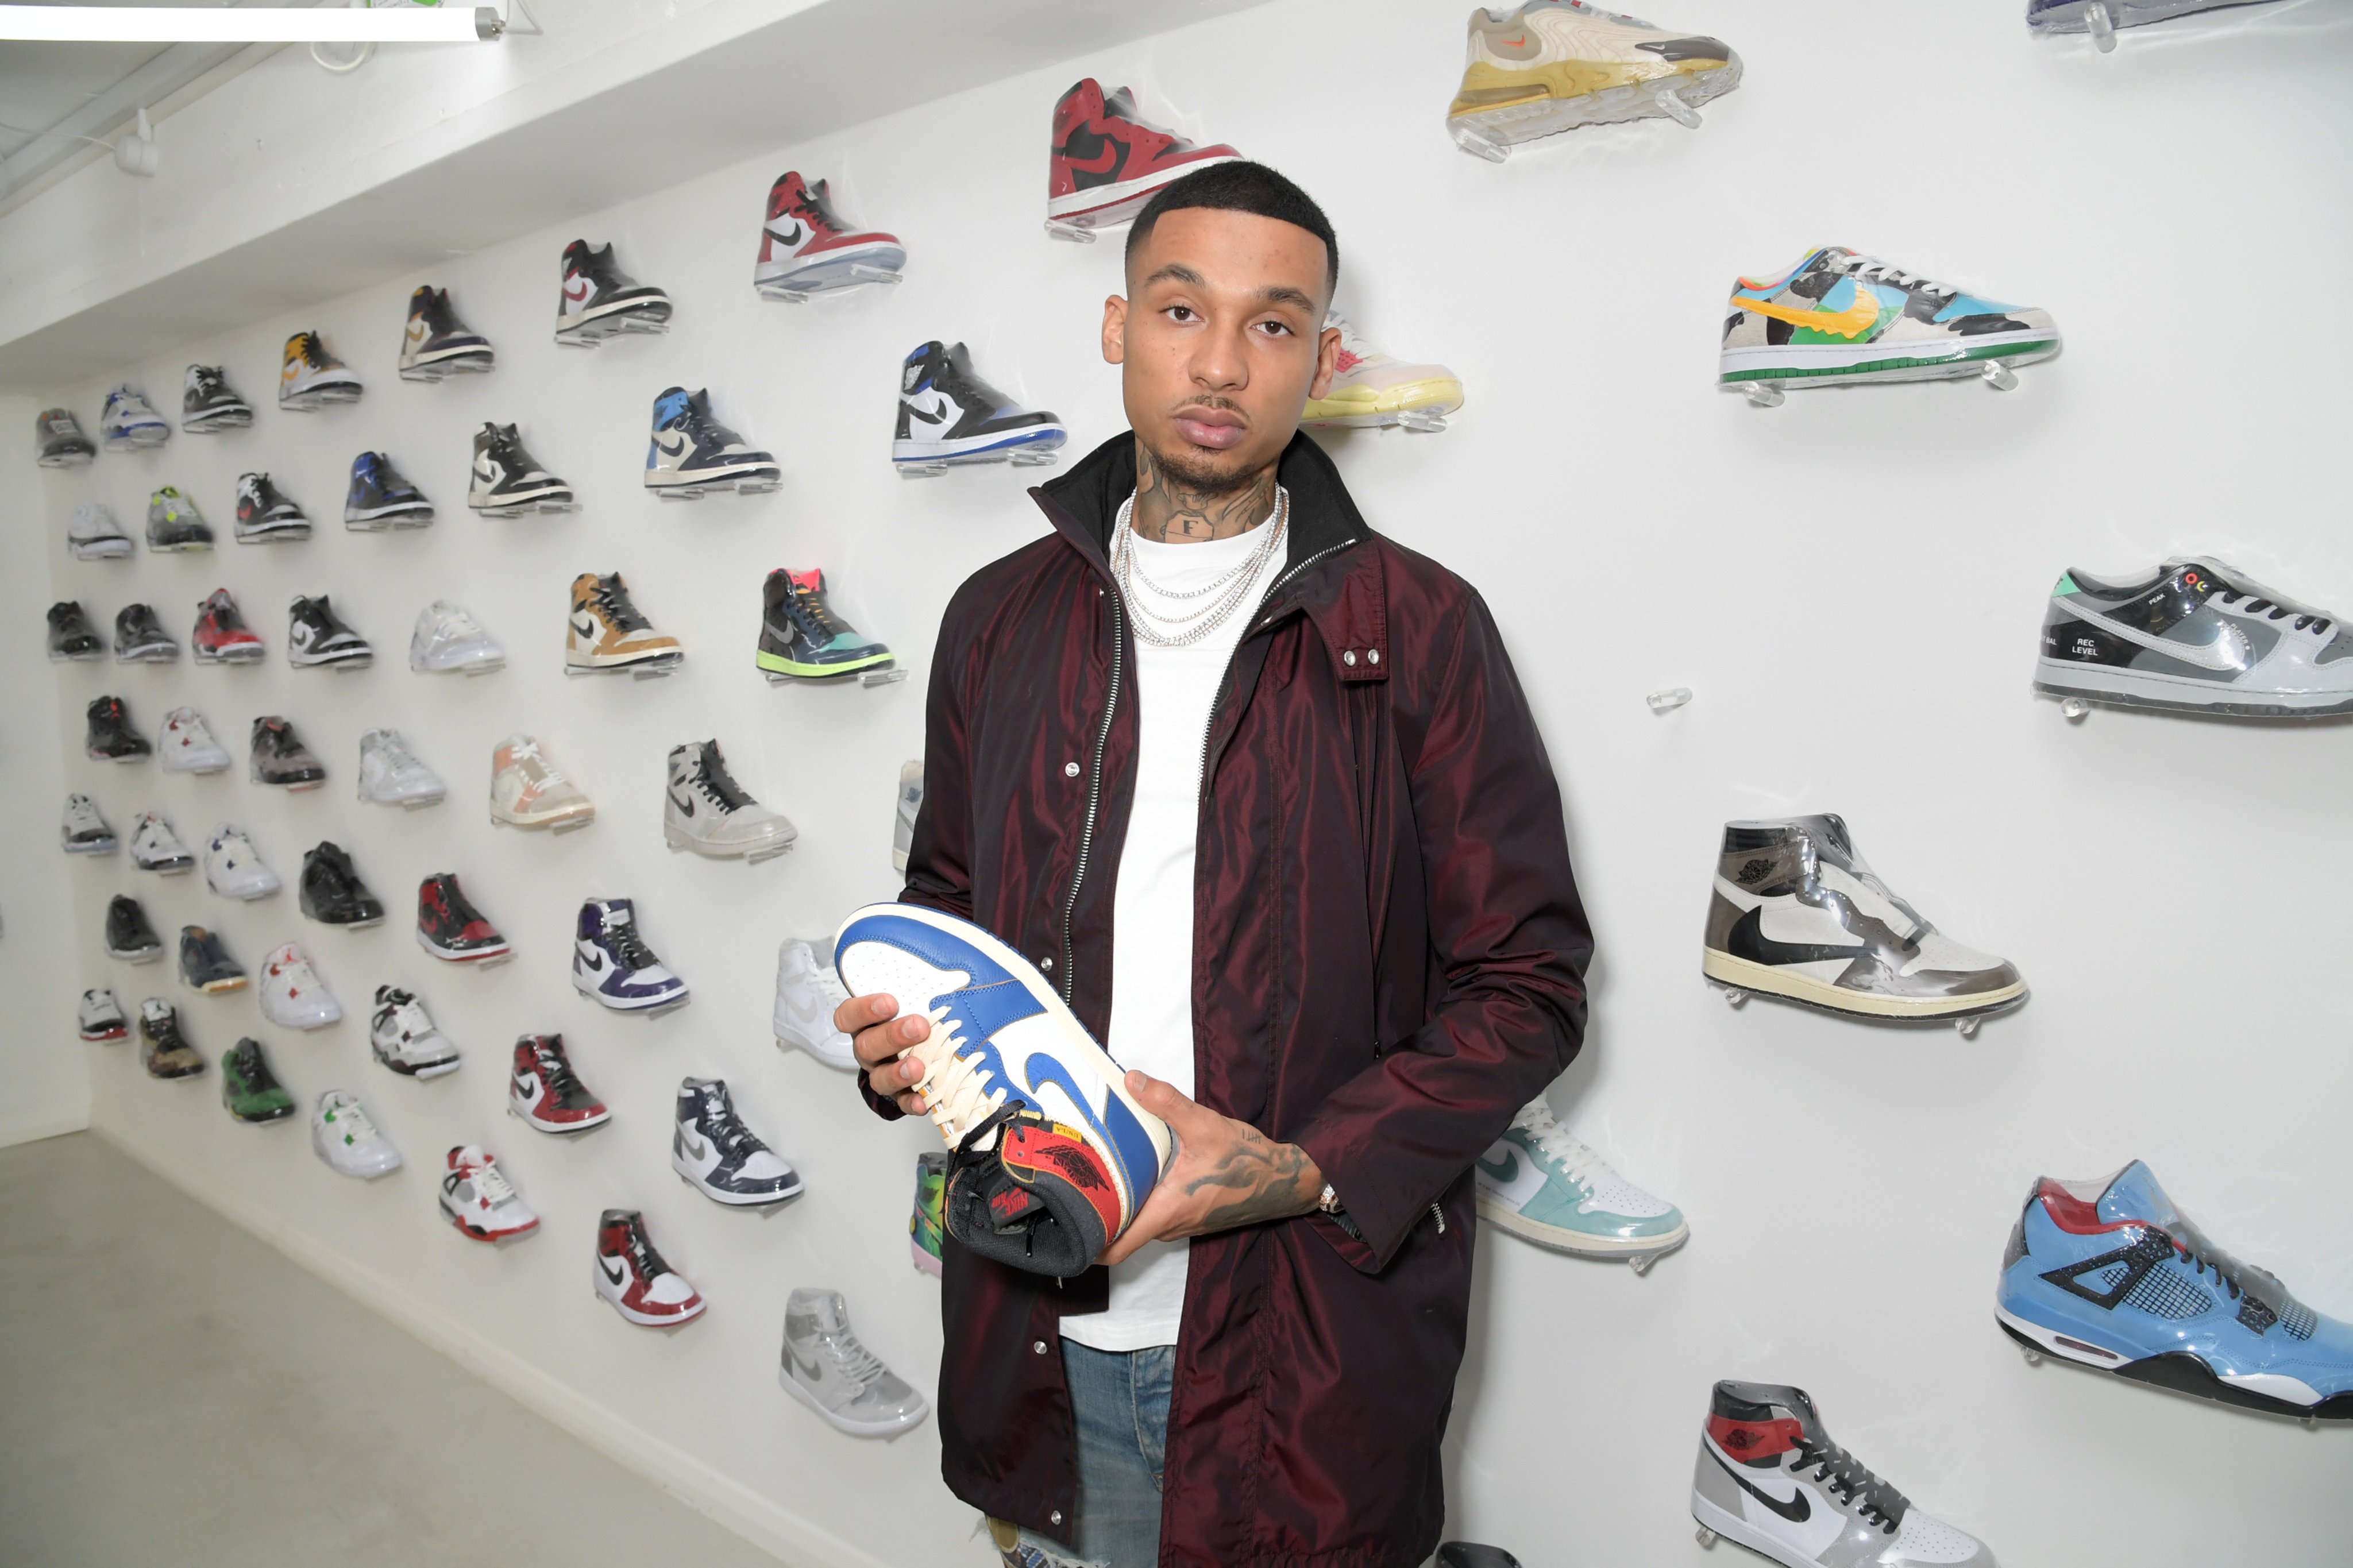 Complex Uk Fredo Announces Multi Million Pound Investment Partnership With Uk Sneaker Retailer Kick Game T Co 468vdgeodw T Co Uiagy2d17t Twitter